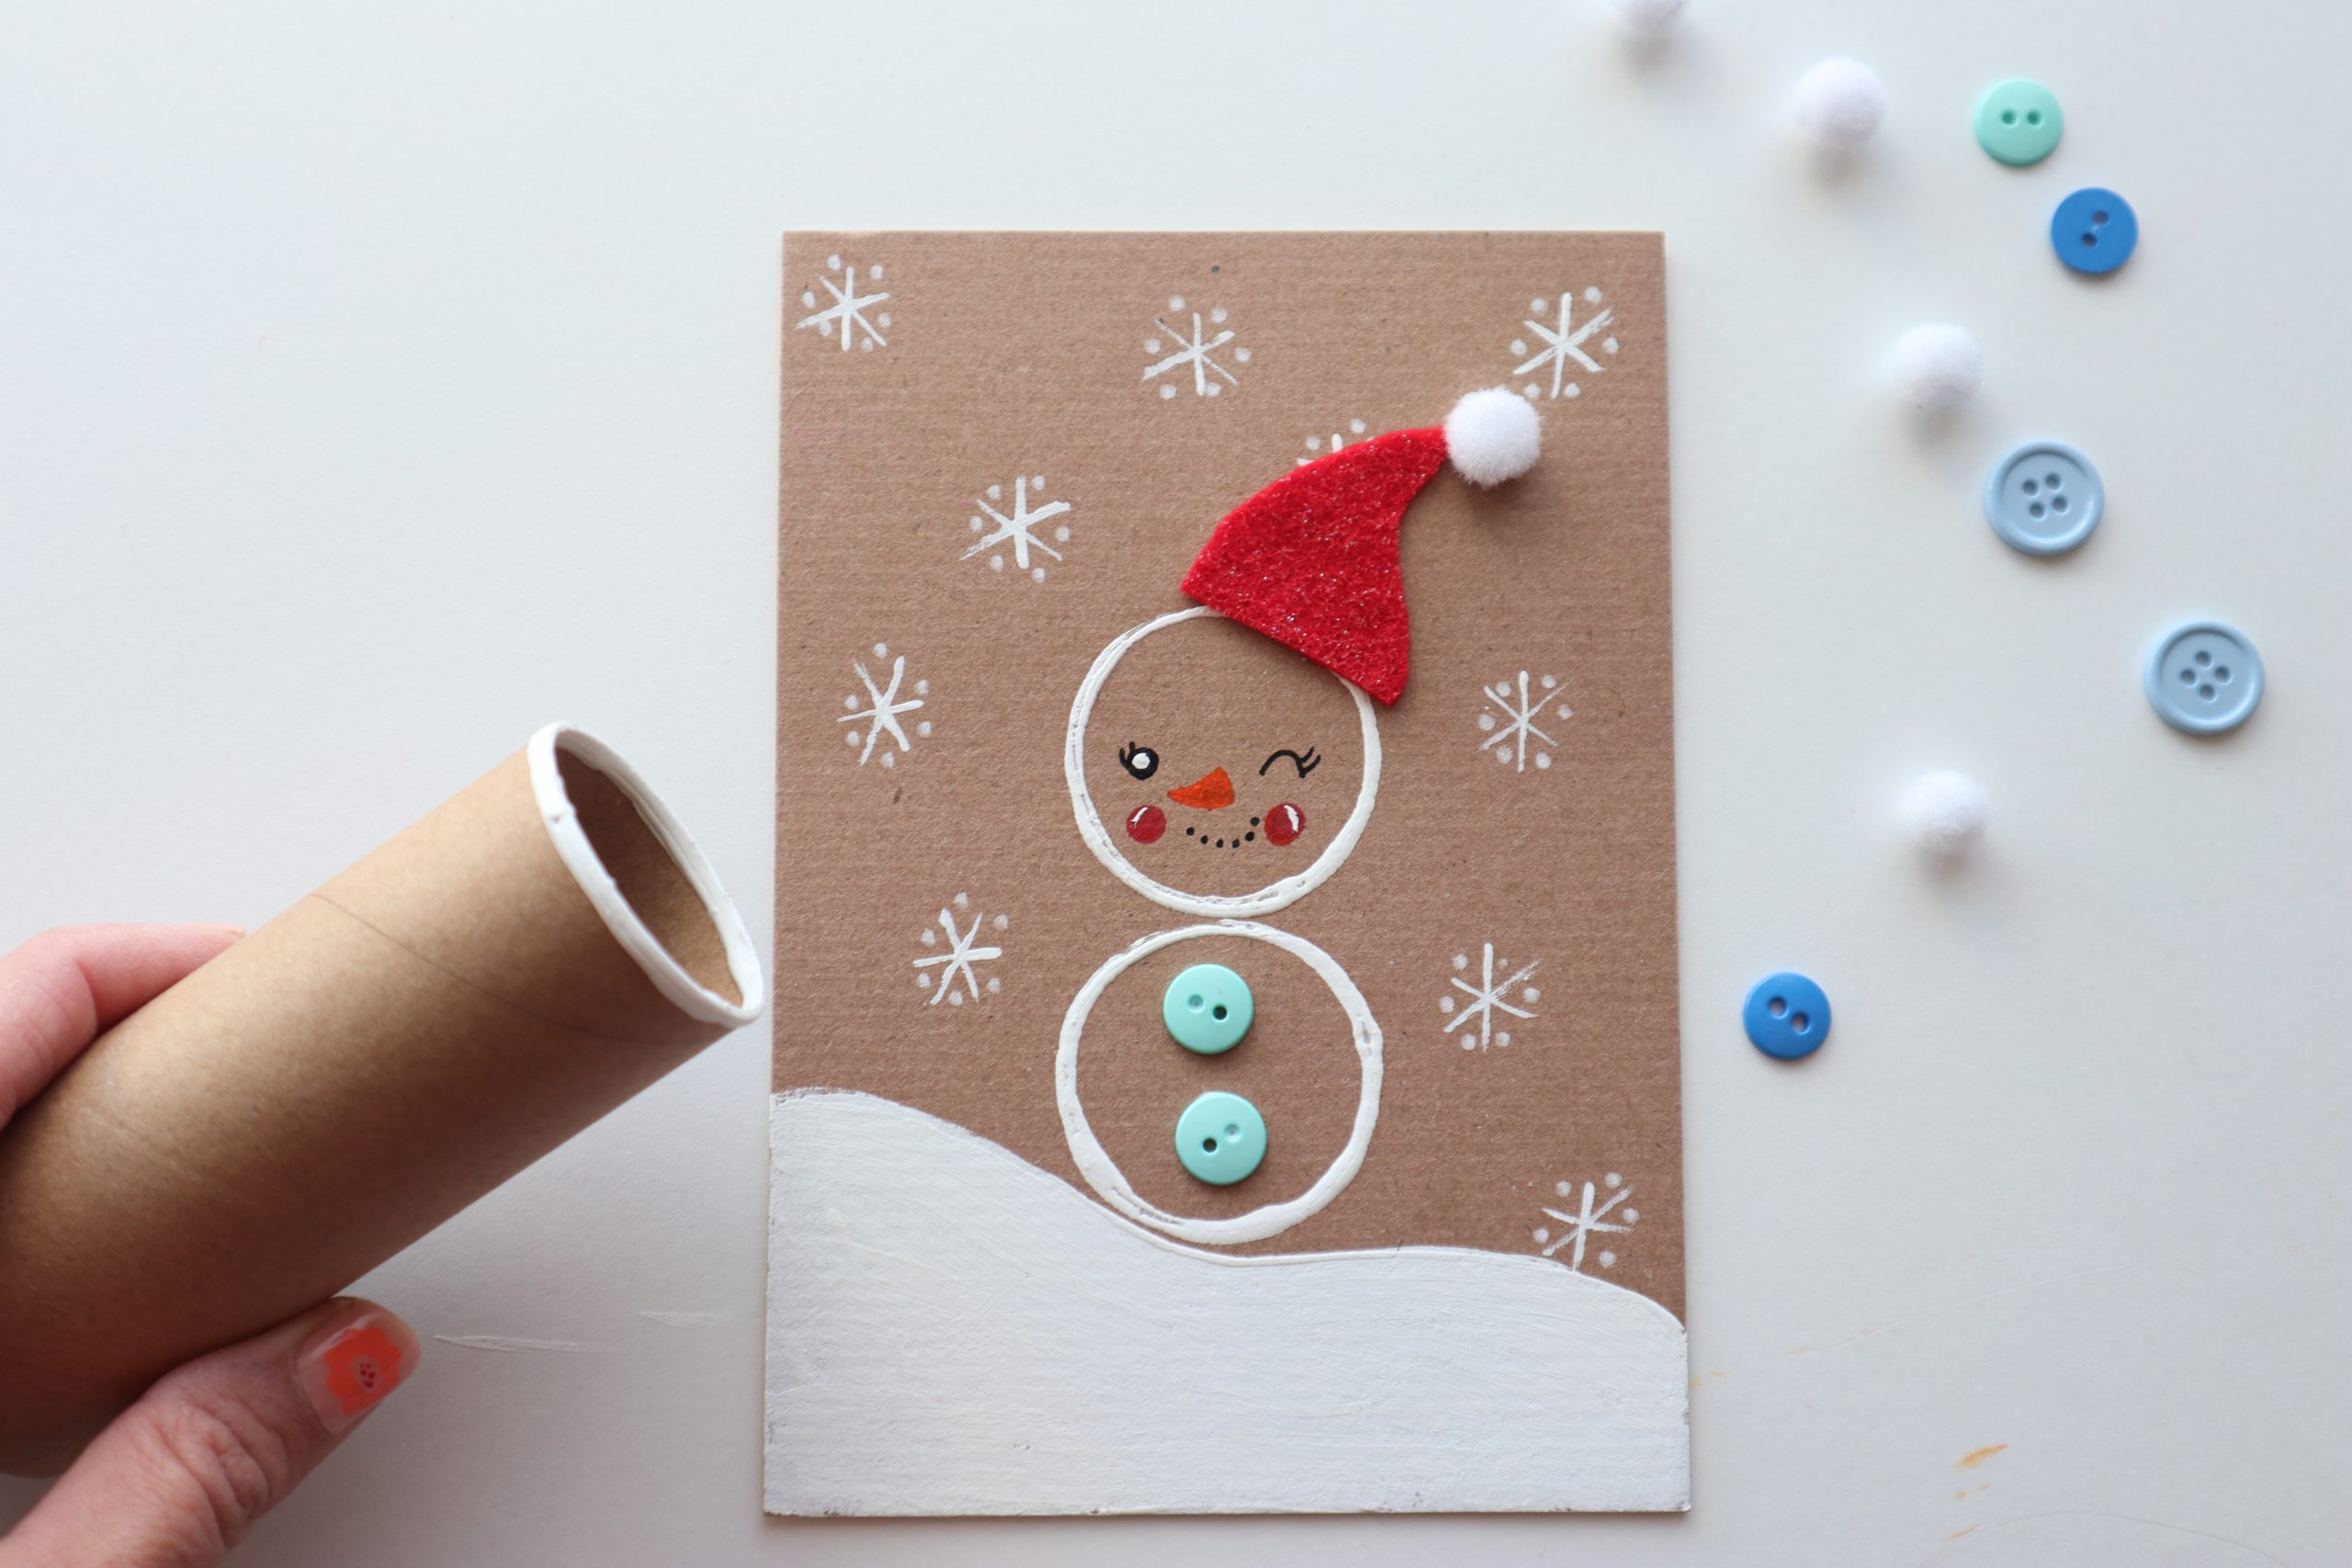 Snowman made with paper roll stamps